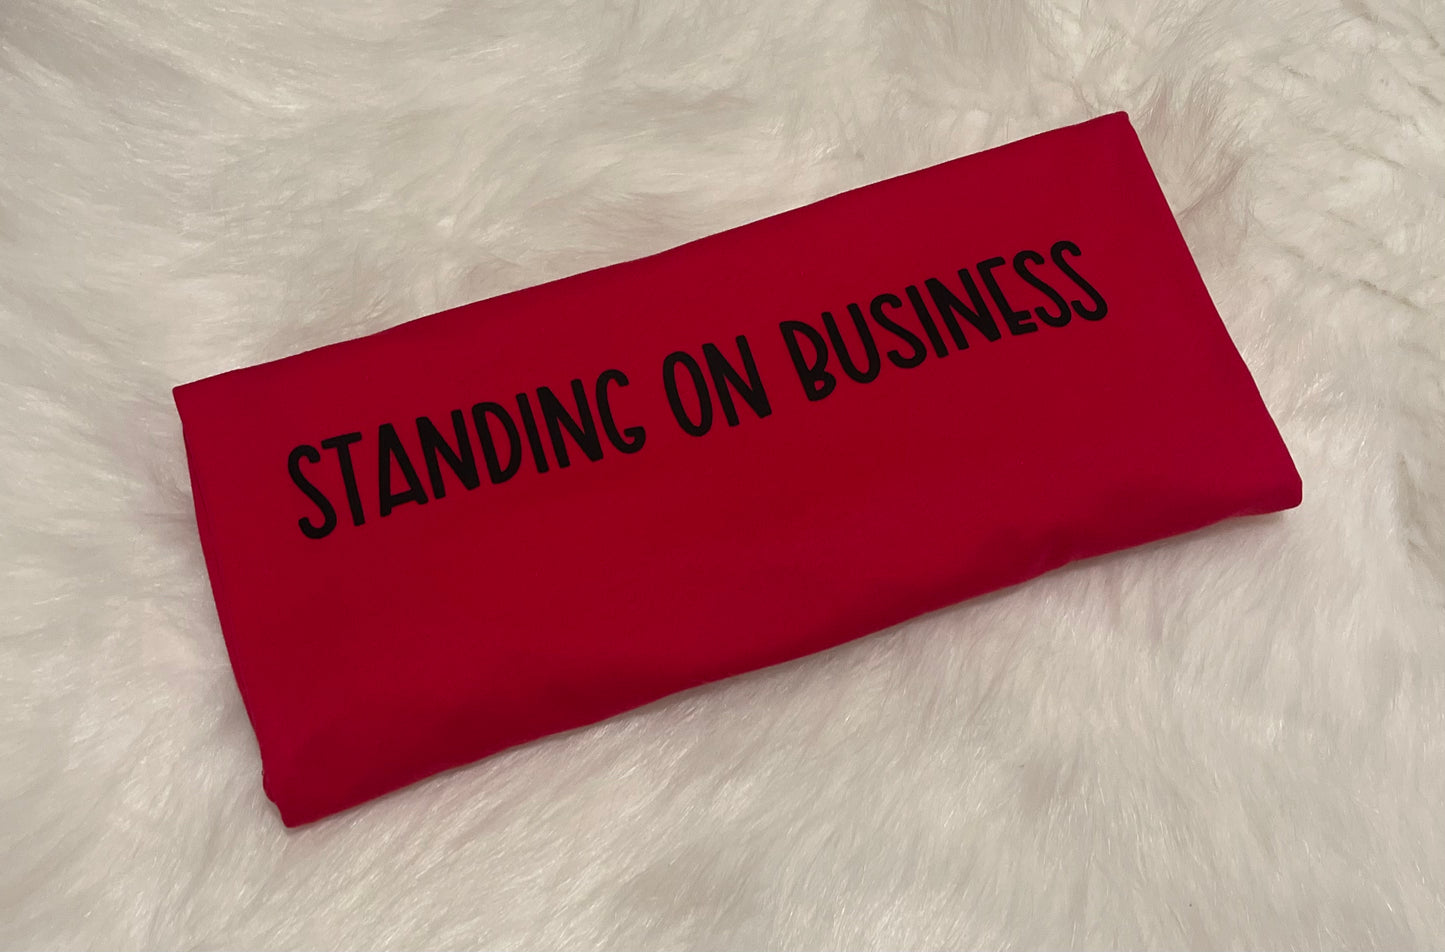 “Standing On Business”